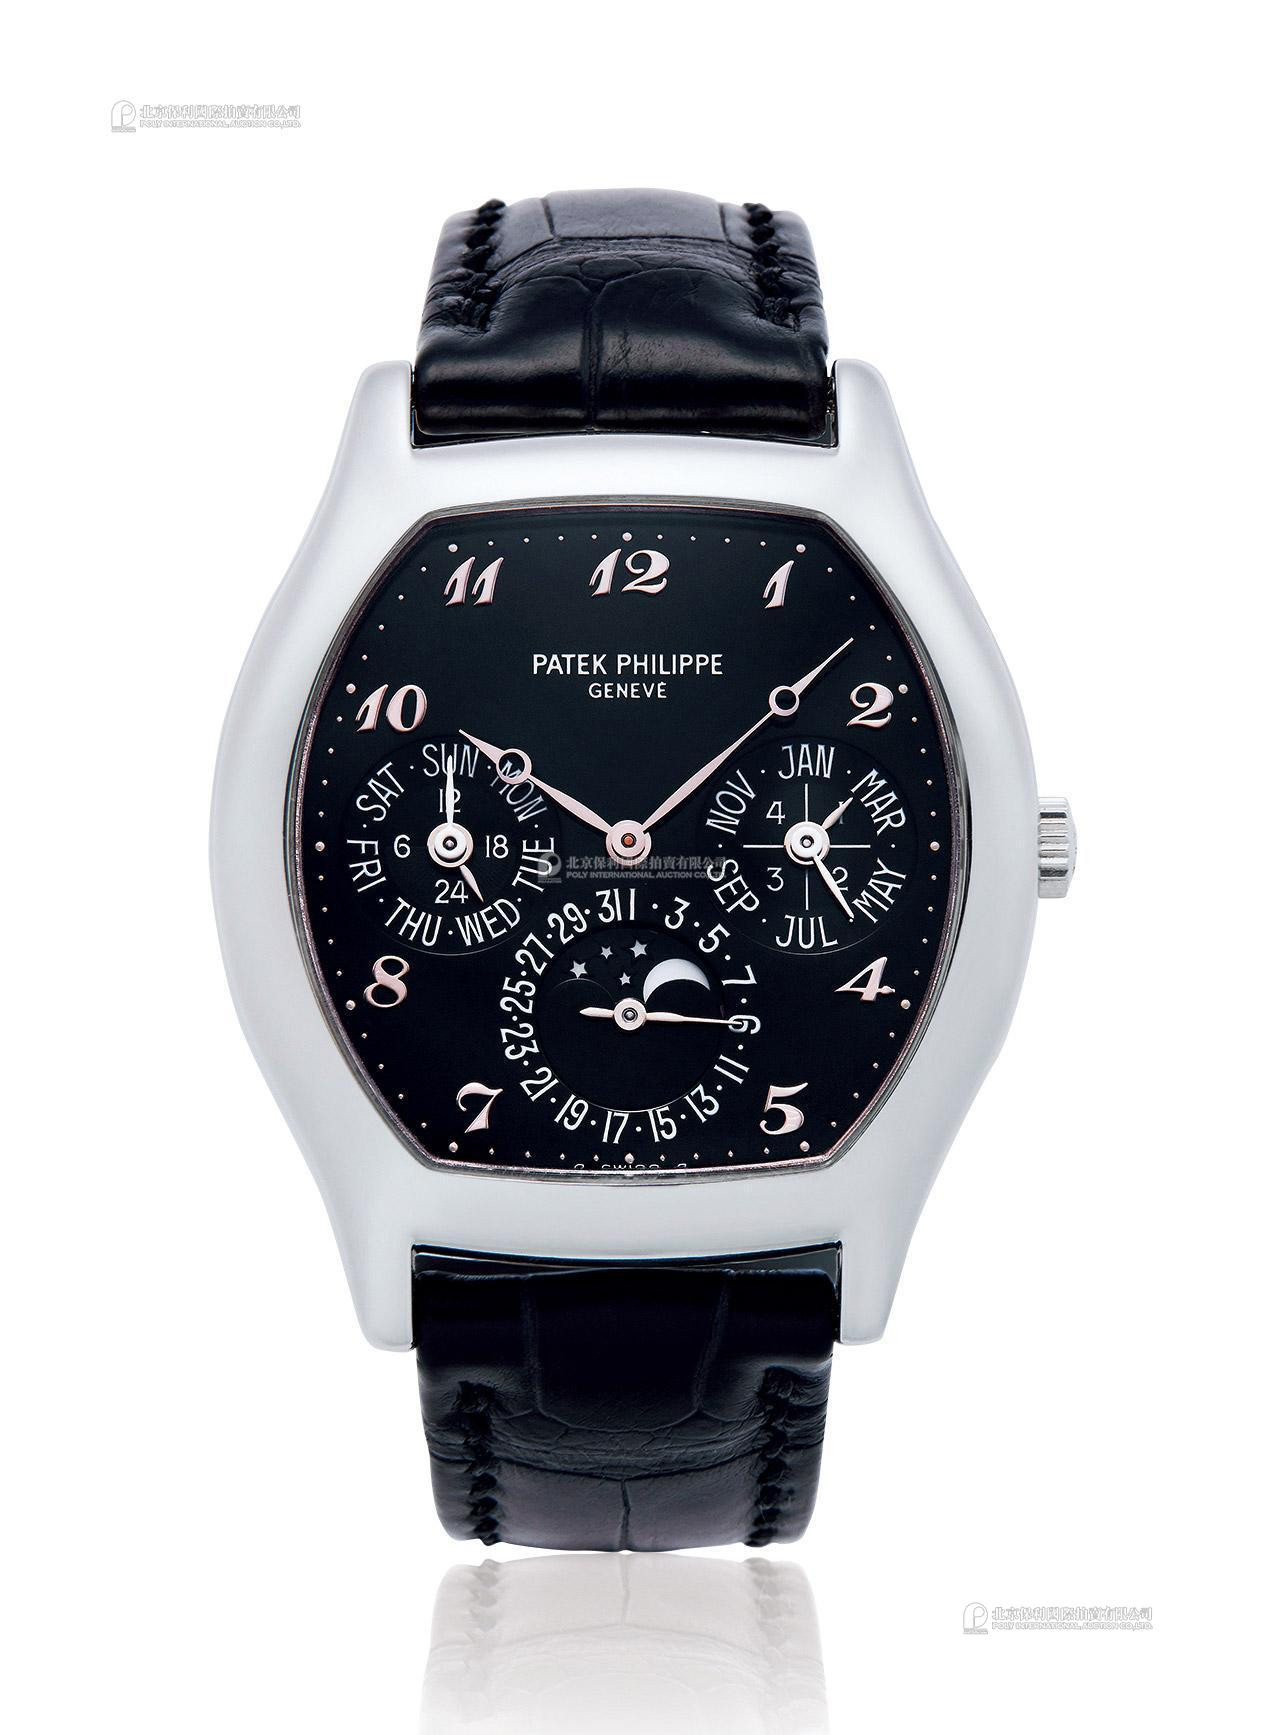 PATEK PHILIPPE A WHITE GOLD PERPETUAL CALENDAR AUTOMATIC WRISTWATCH WITH MOON-PHASE INDICATION